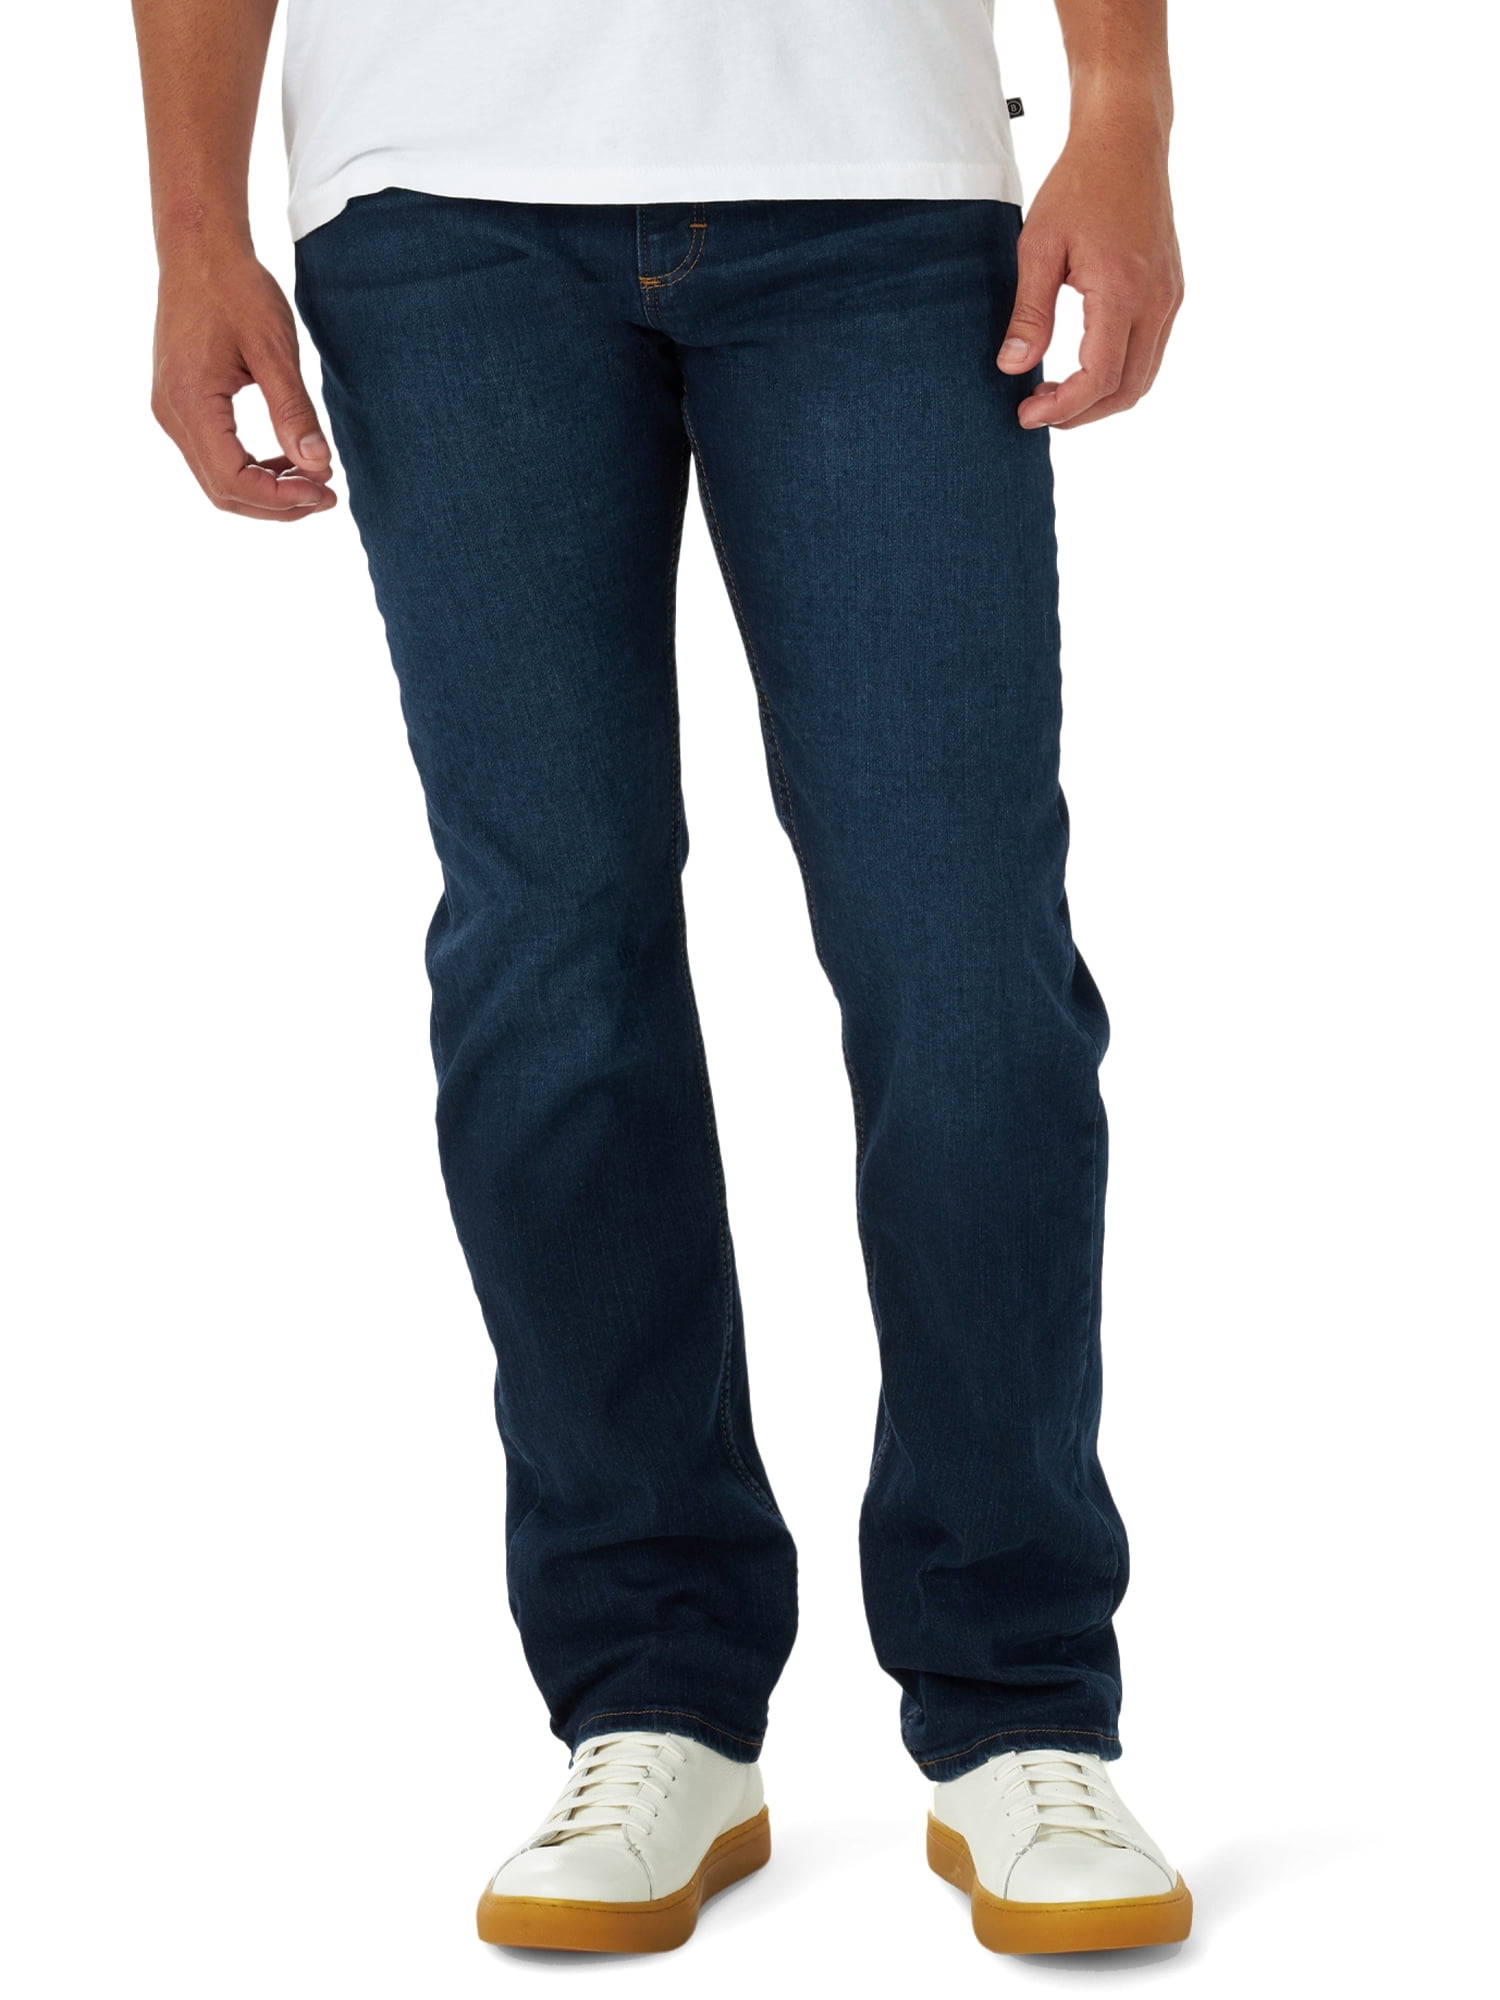 Wrangler Men's Performance Series Regular Fit Jean with Weather Anything -  